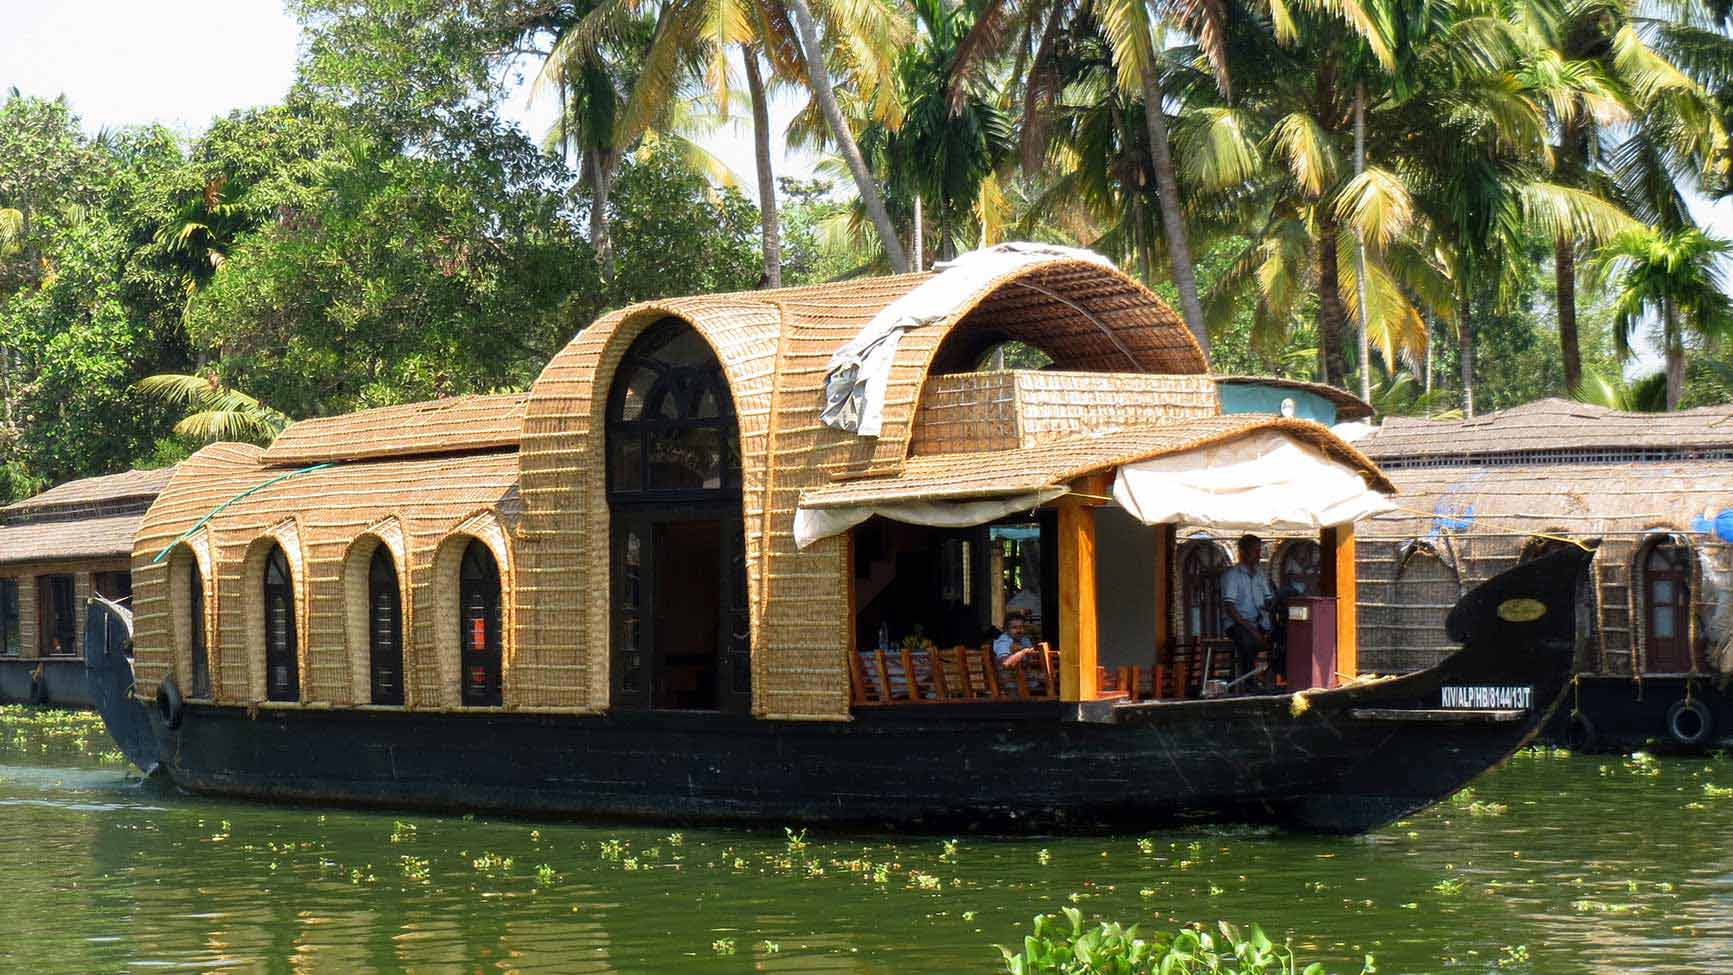 Kerala God's Own Country